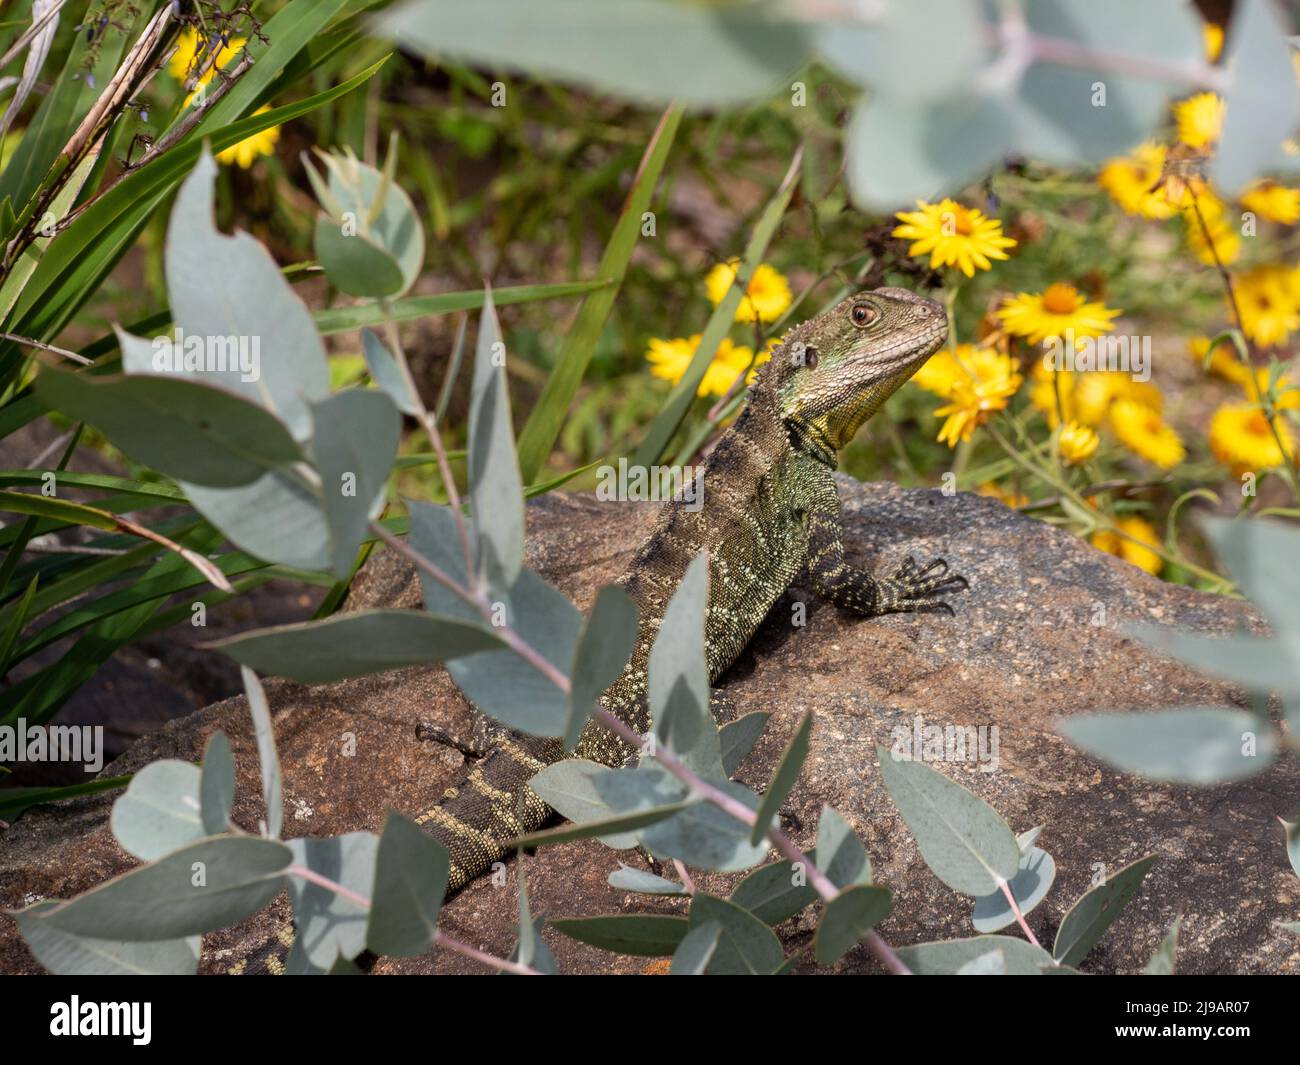 Lizard on a rock trying to blend in amongst yellow paper daisies and blue gum leaves, Eastern Water Dragon, Australian native reptile and plants Stock Photo